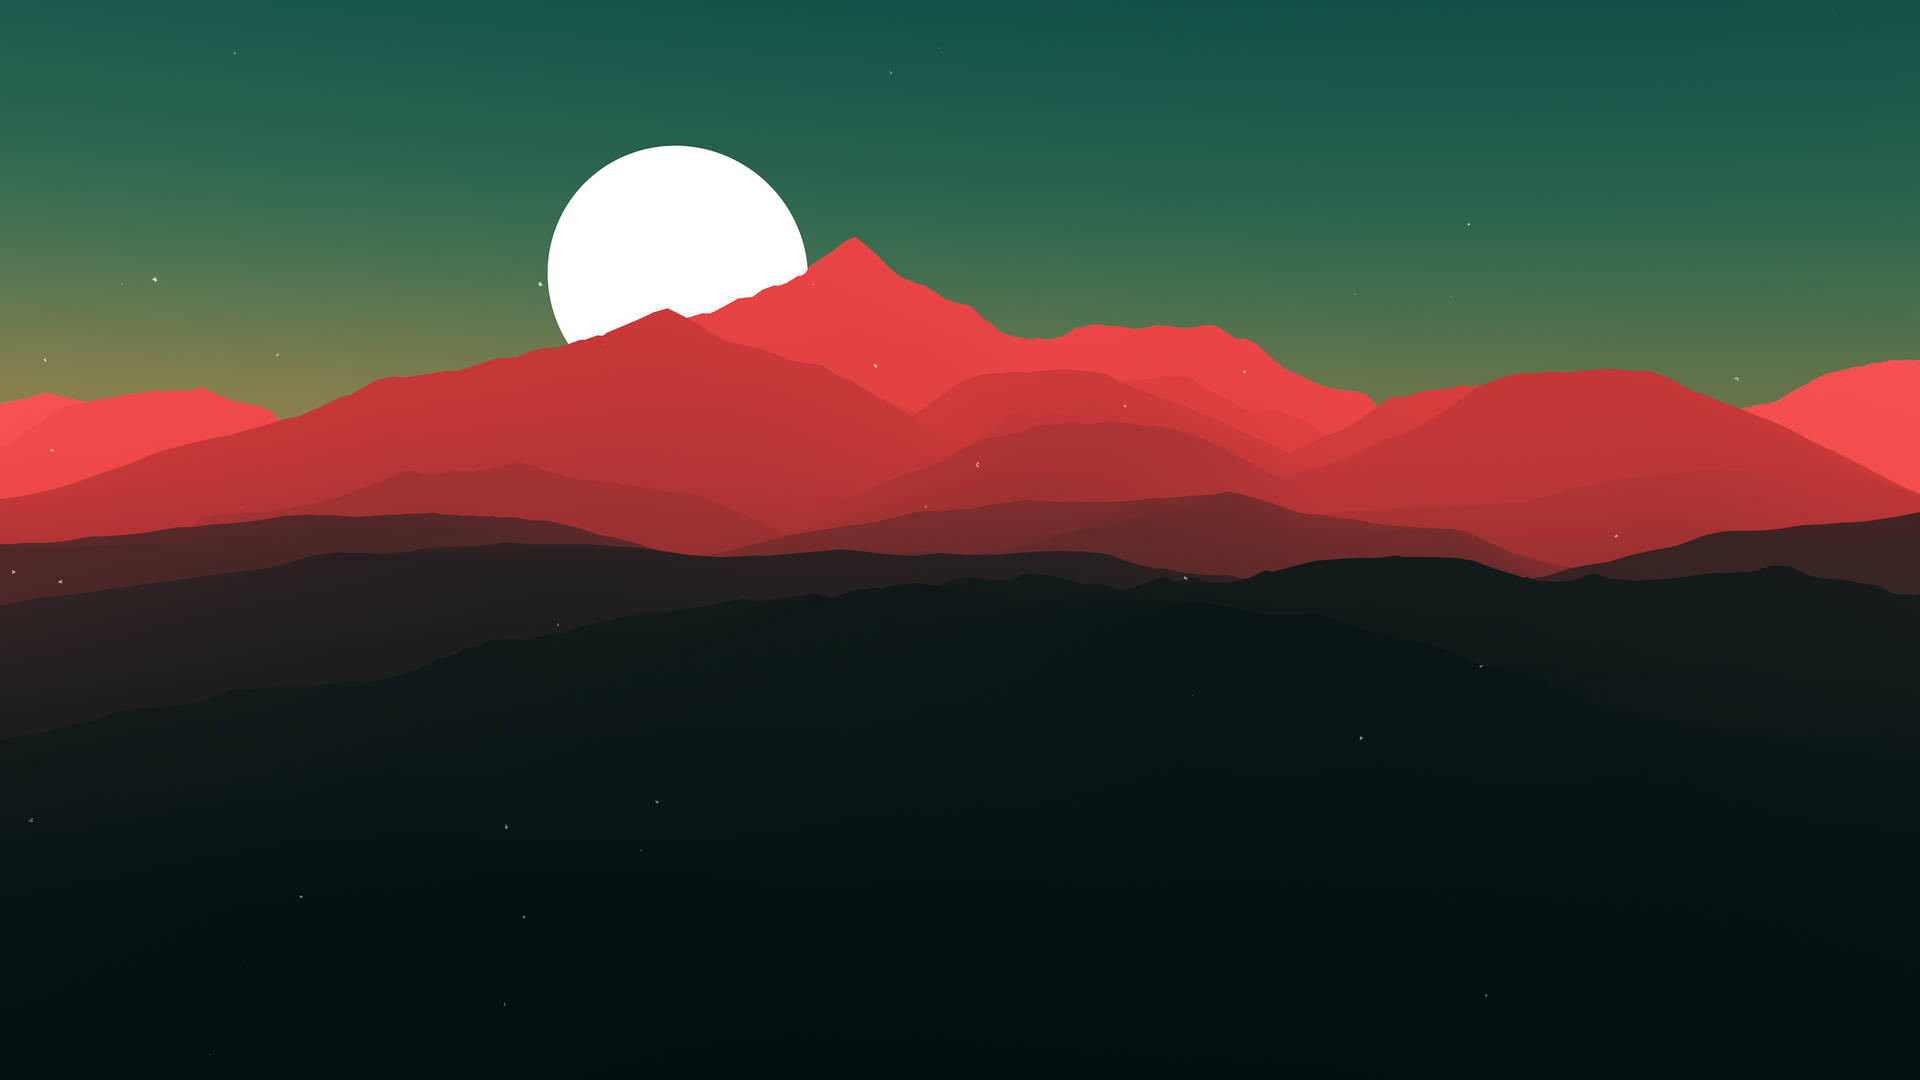 Red Mountain And White Moon Art